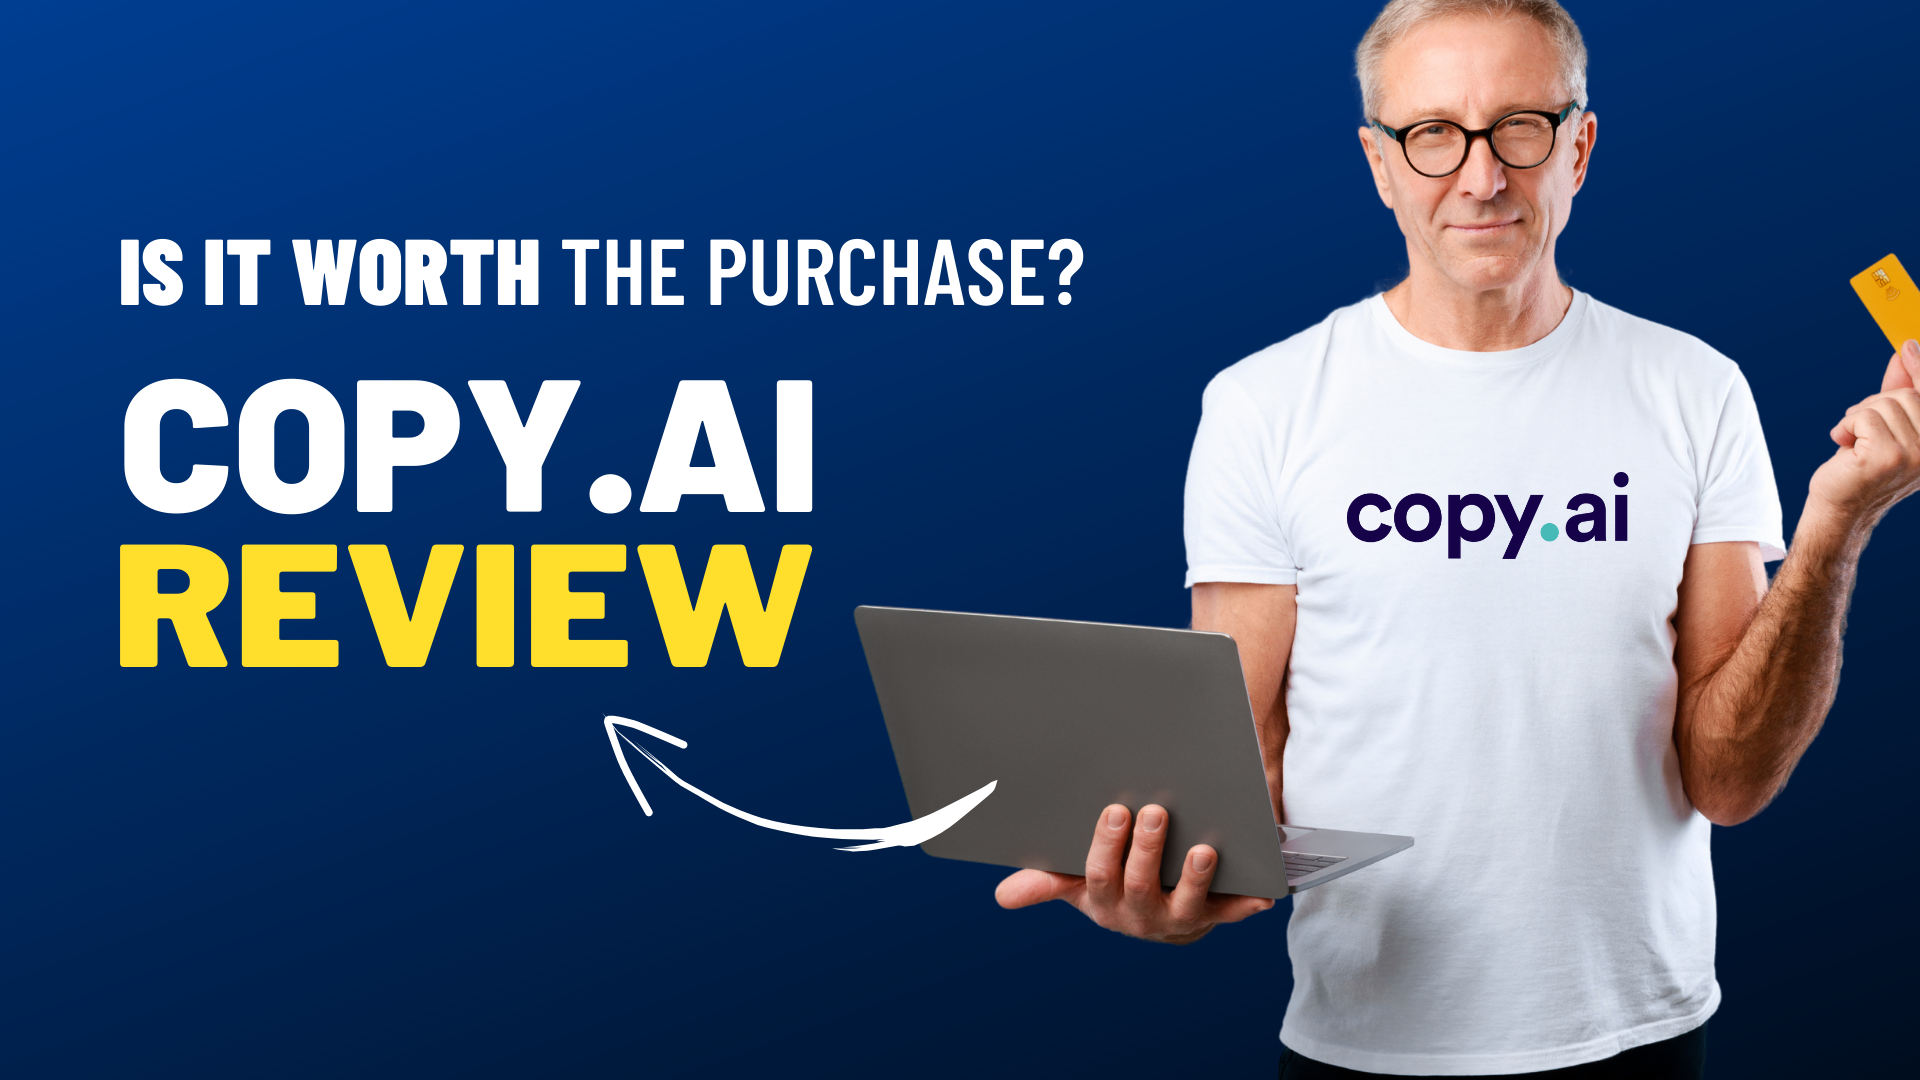 Copy.ai Review: Is this AI Copy Writer worth the Purchase?